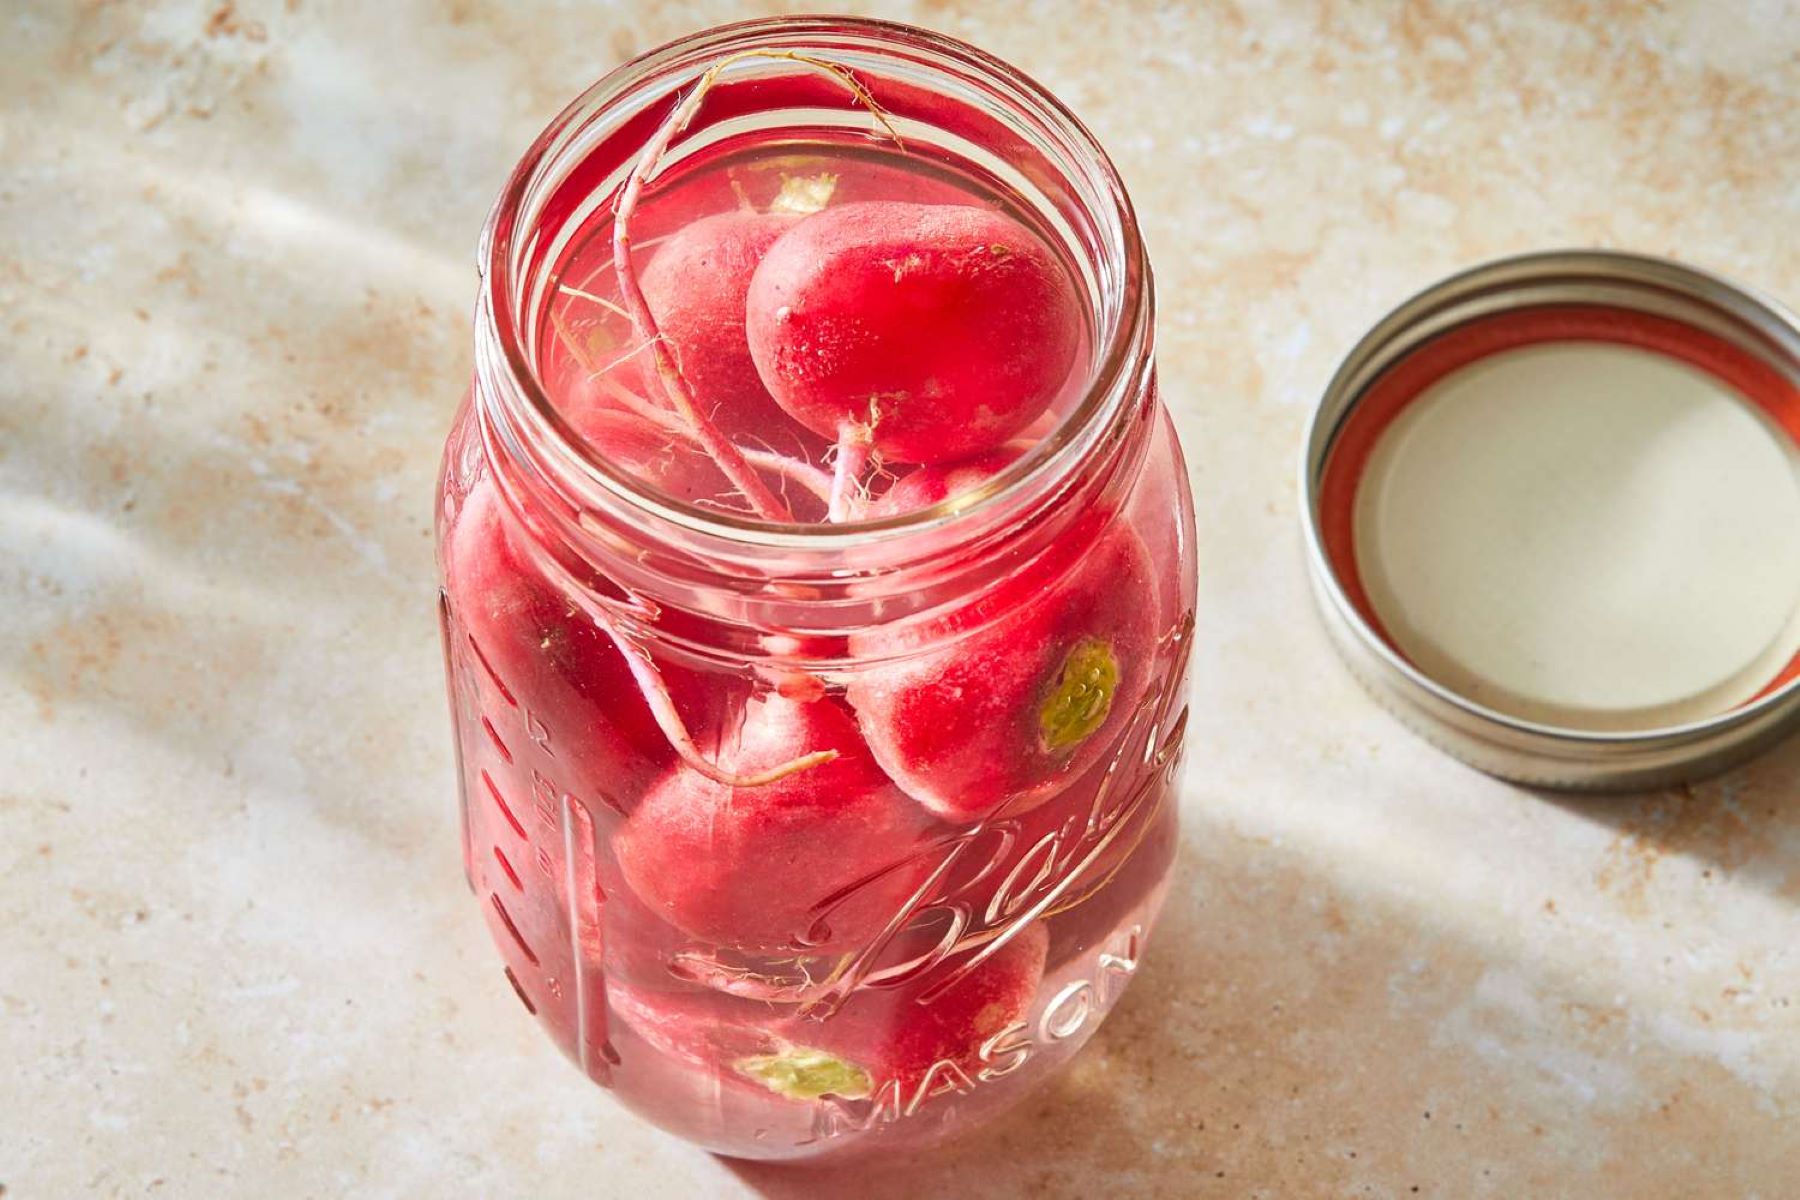 How To Store Radishes In Mason Jars